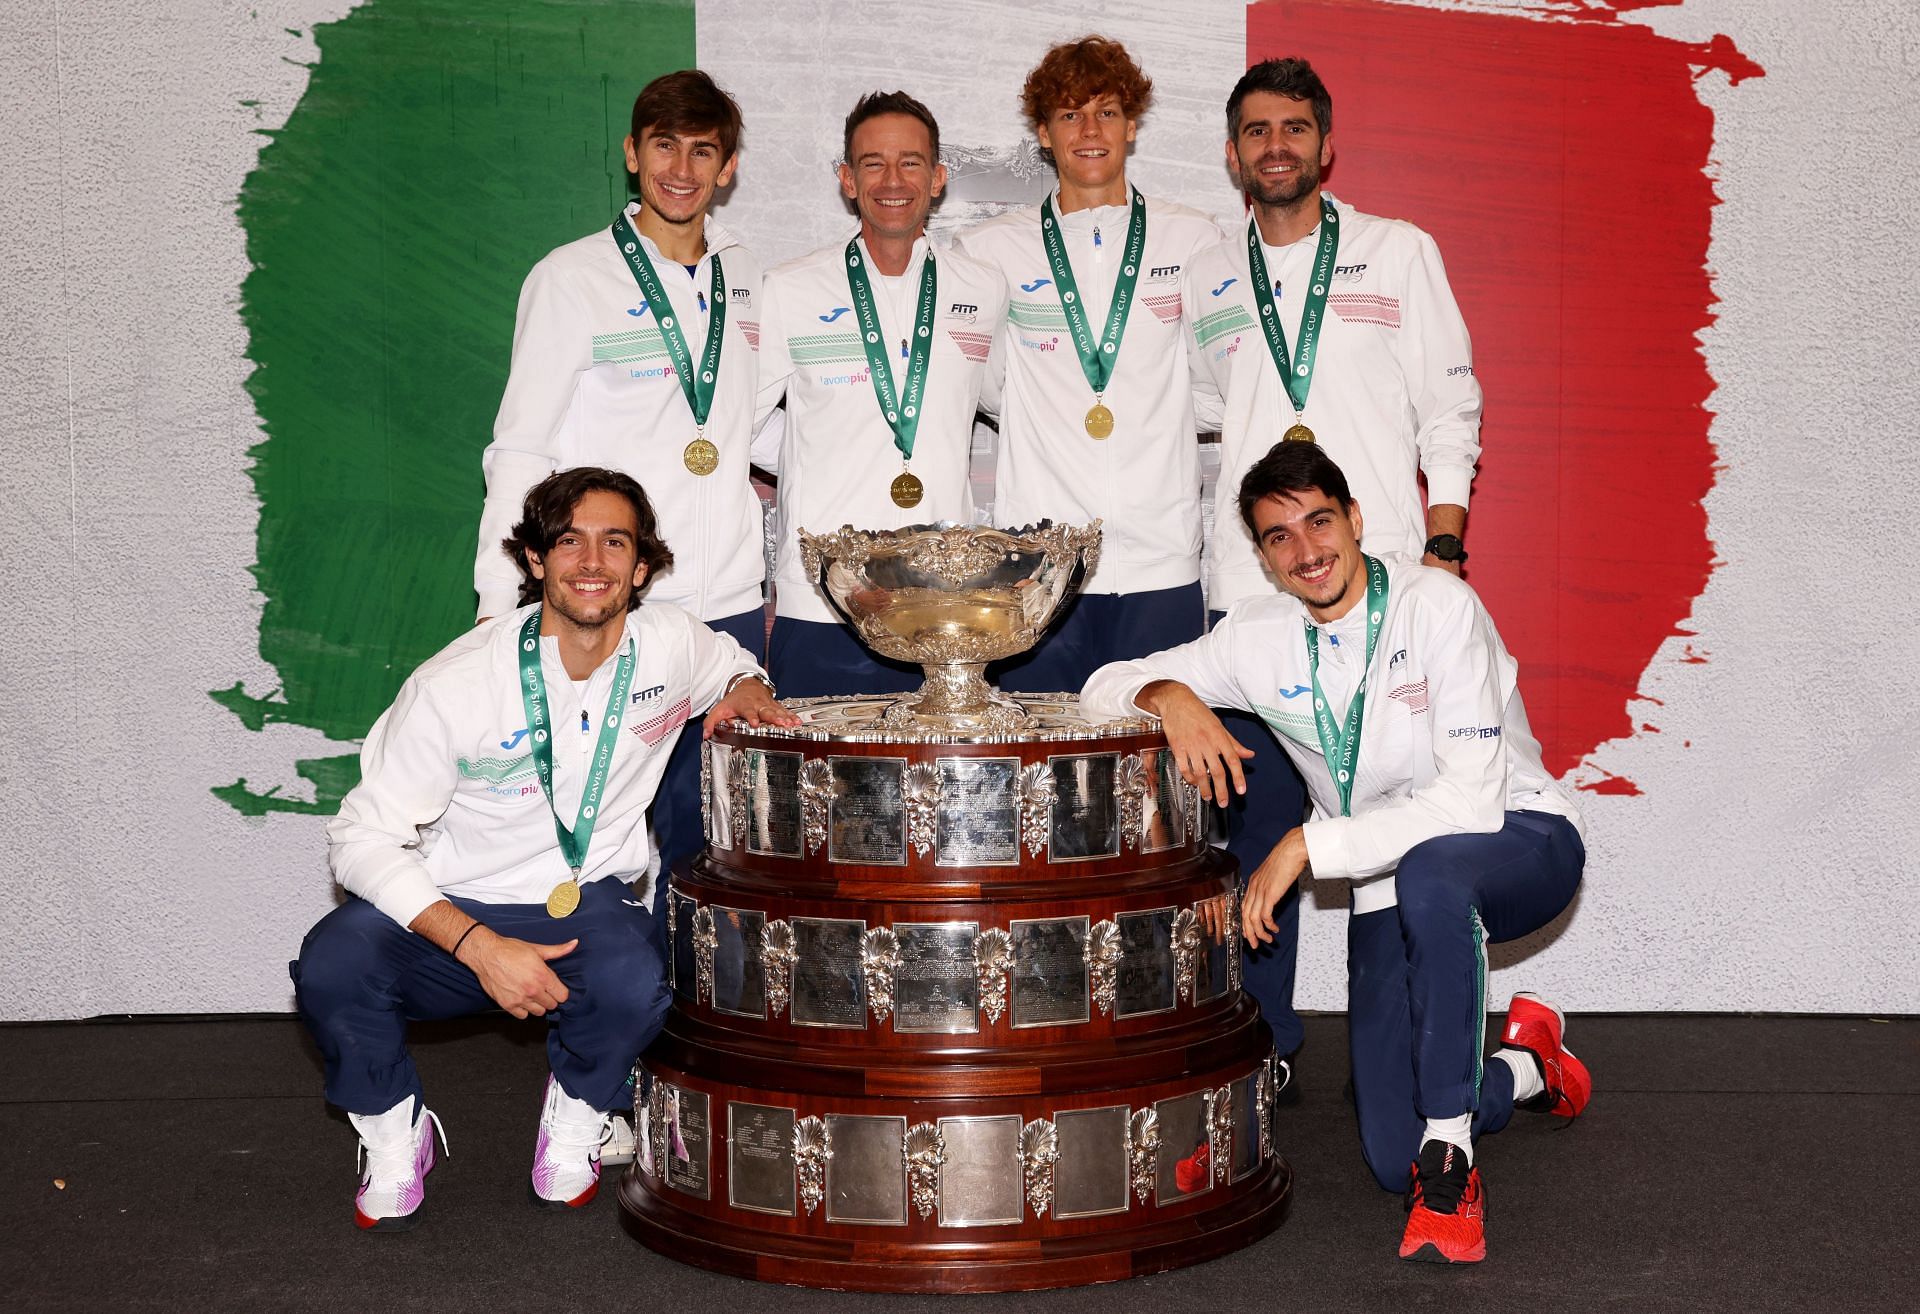 Jannik Sinner pictured with his compatriots after the 2023 Davis Cup Final